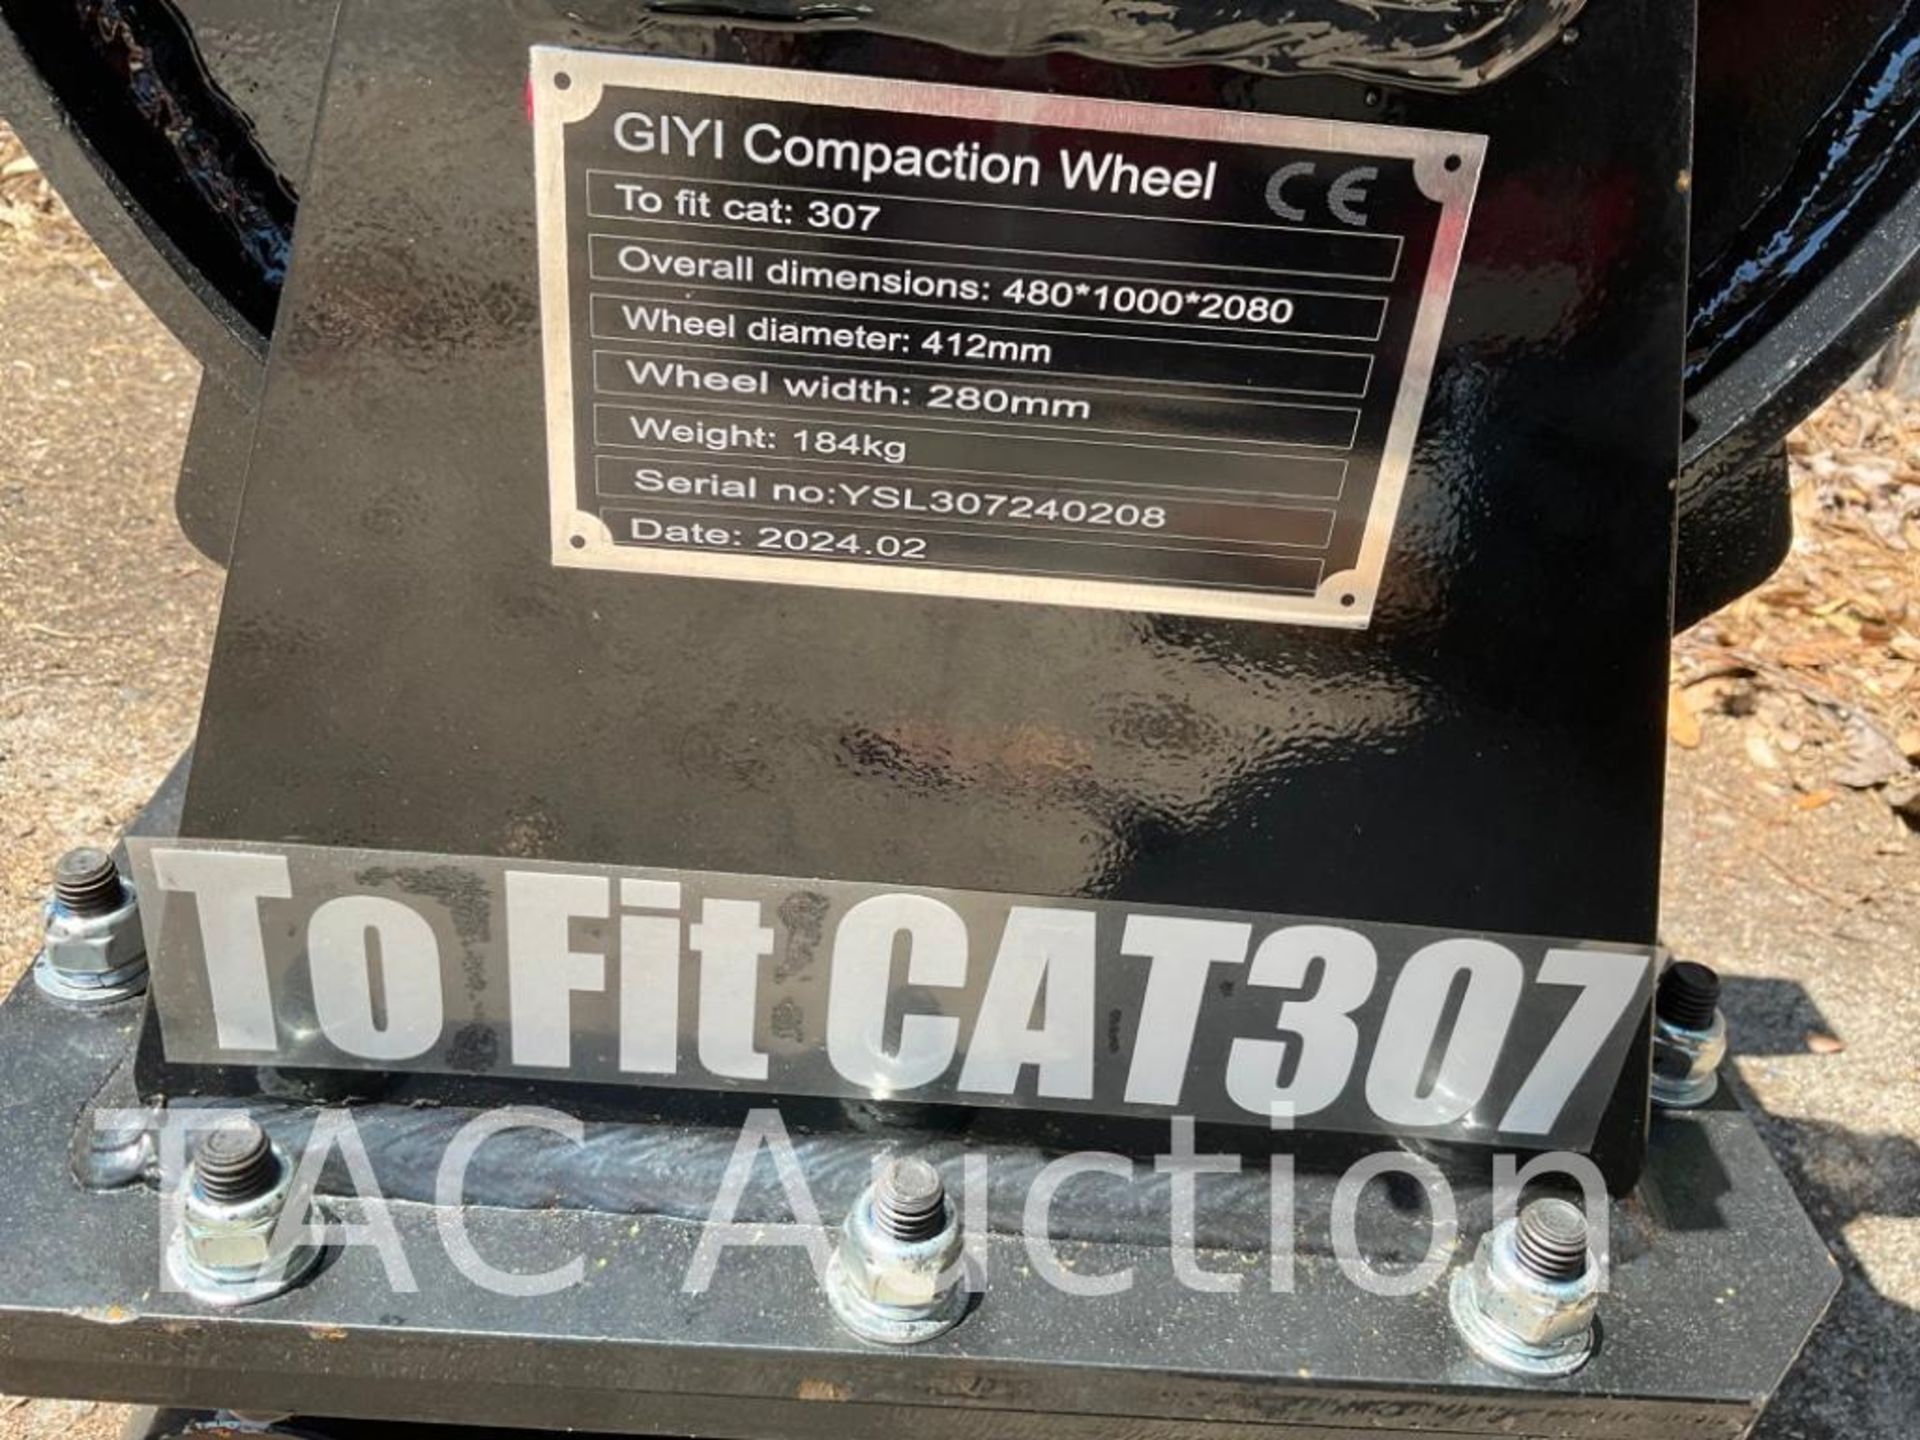 New Giyi Excavator Compaction Wheel For Cat 307 - Image 4 of 6